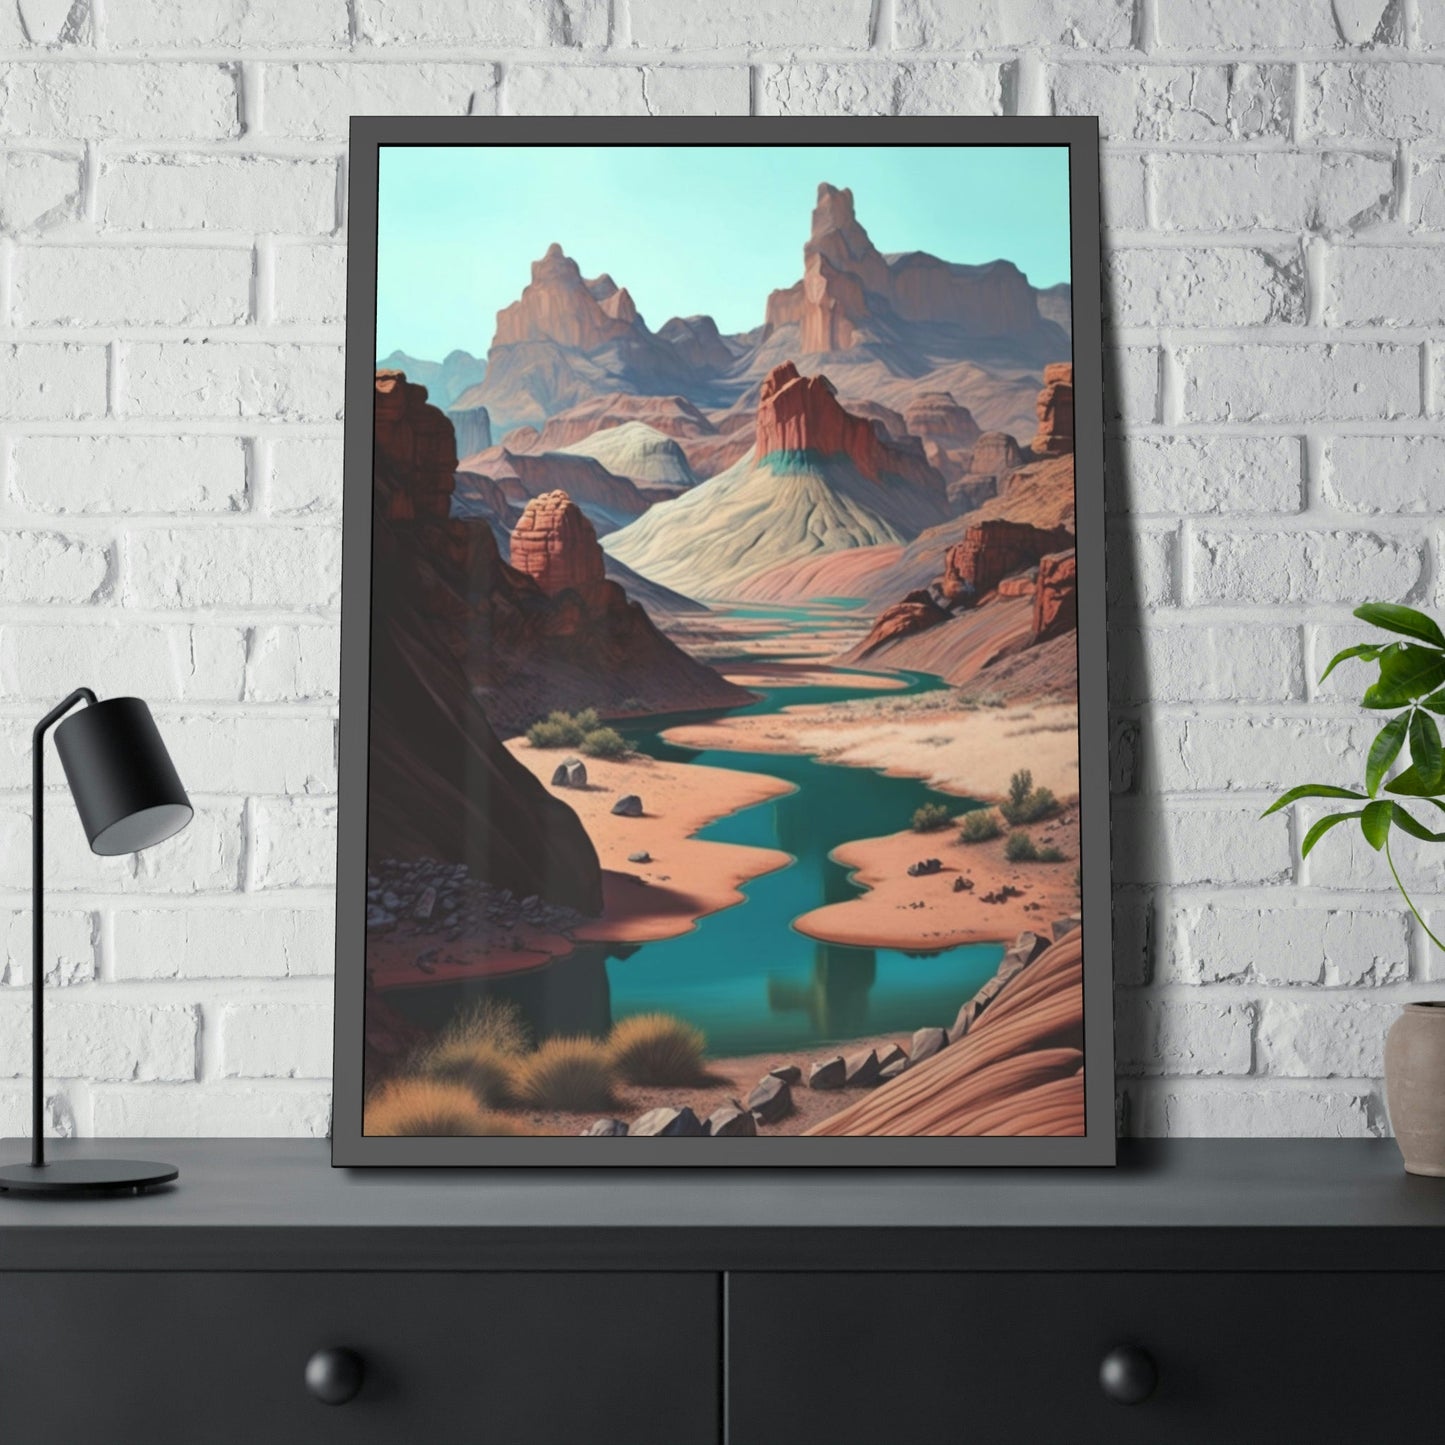 The Great Outdoors: Canyons Art on Framed Canvas and Posters for Nature Lovers